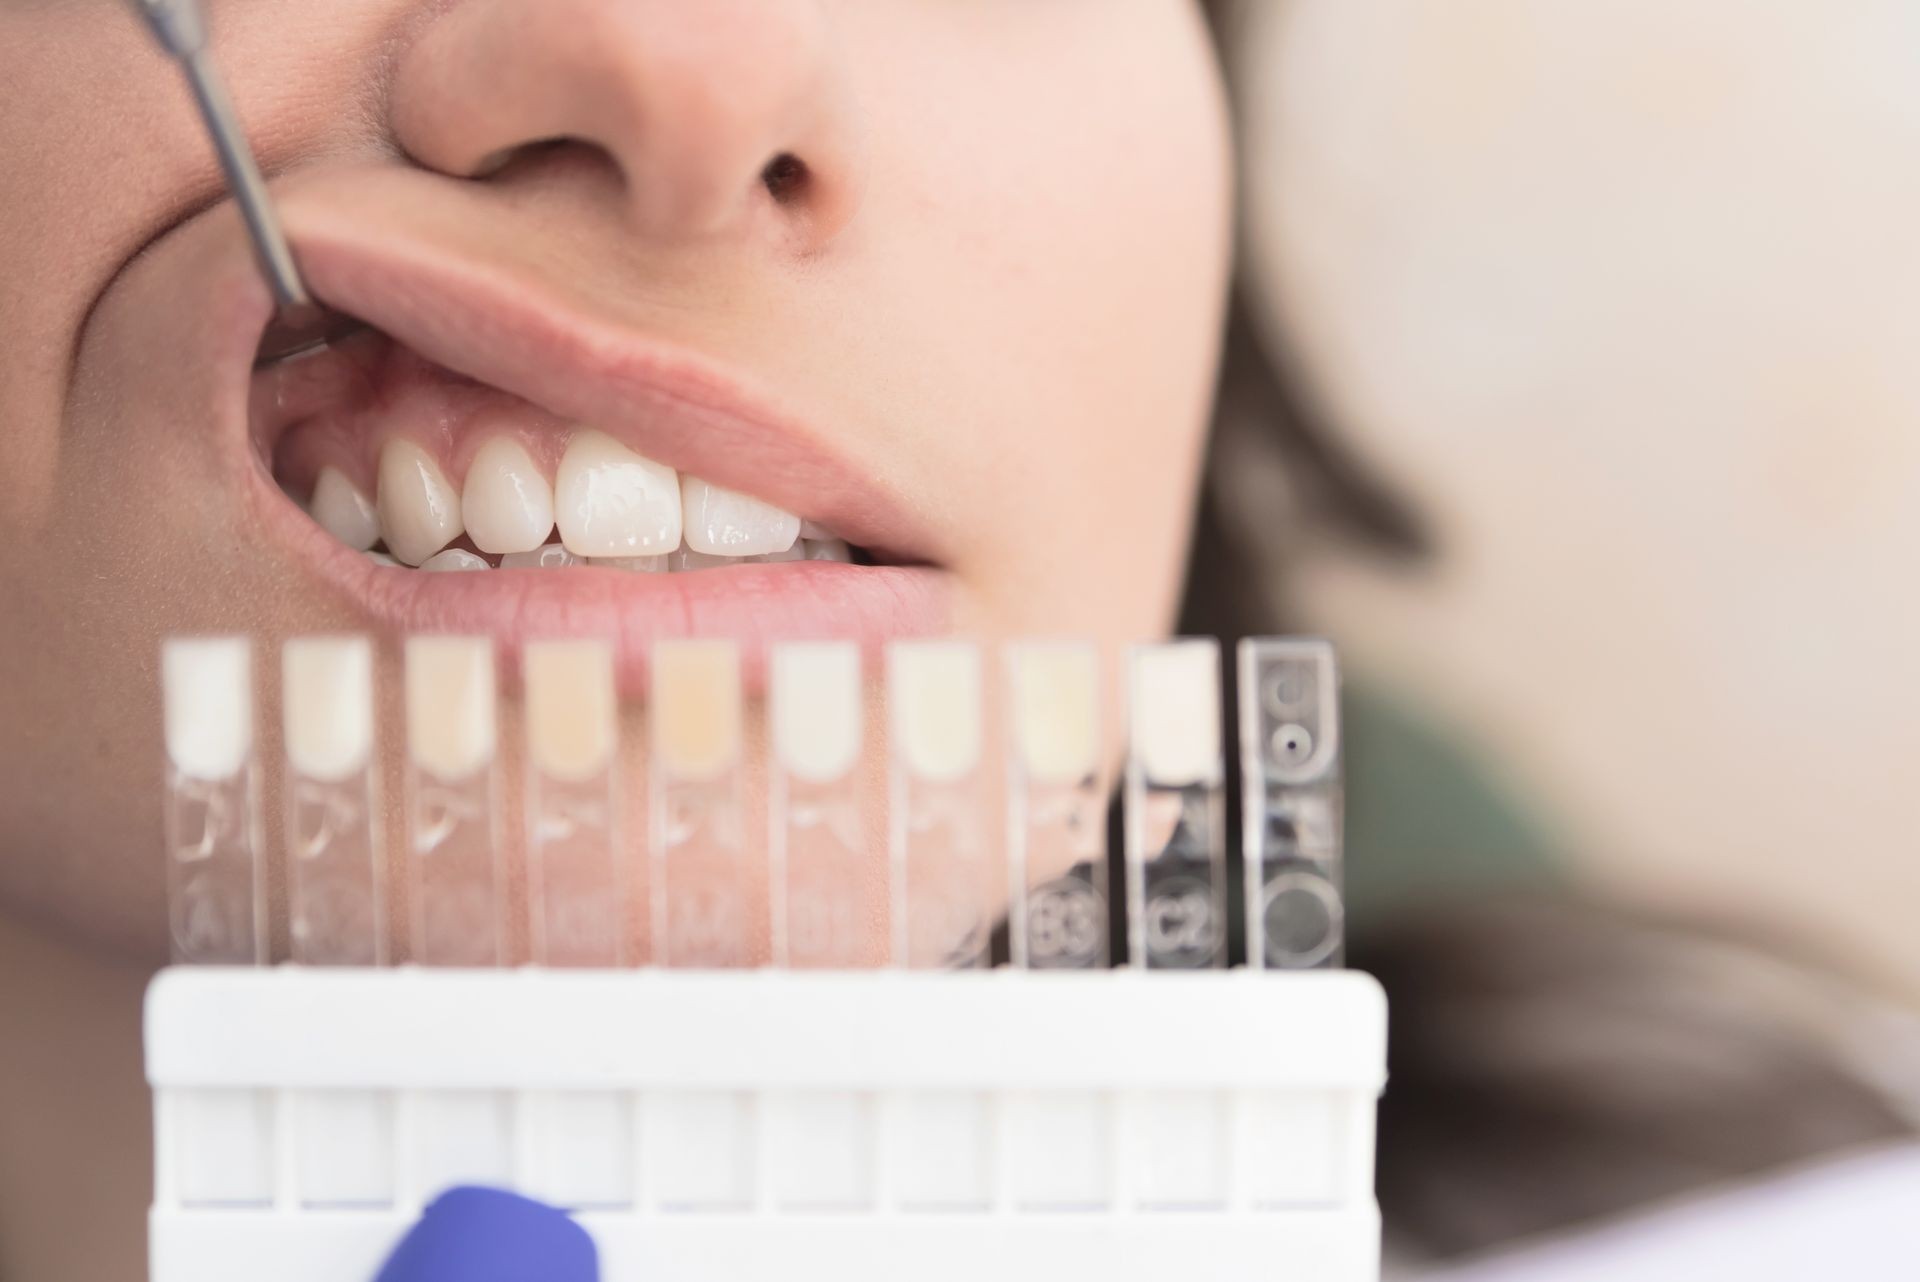 Closeup cropped image of female patient at dental clinic having her teeth checked for whitening, Comparing teeth colour with template